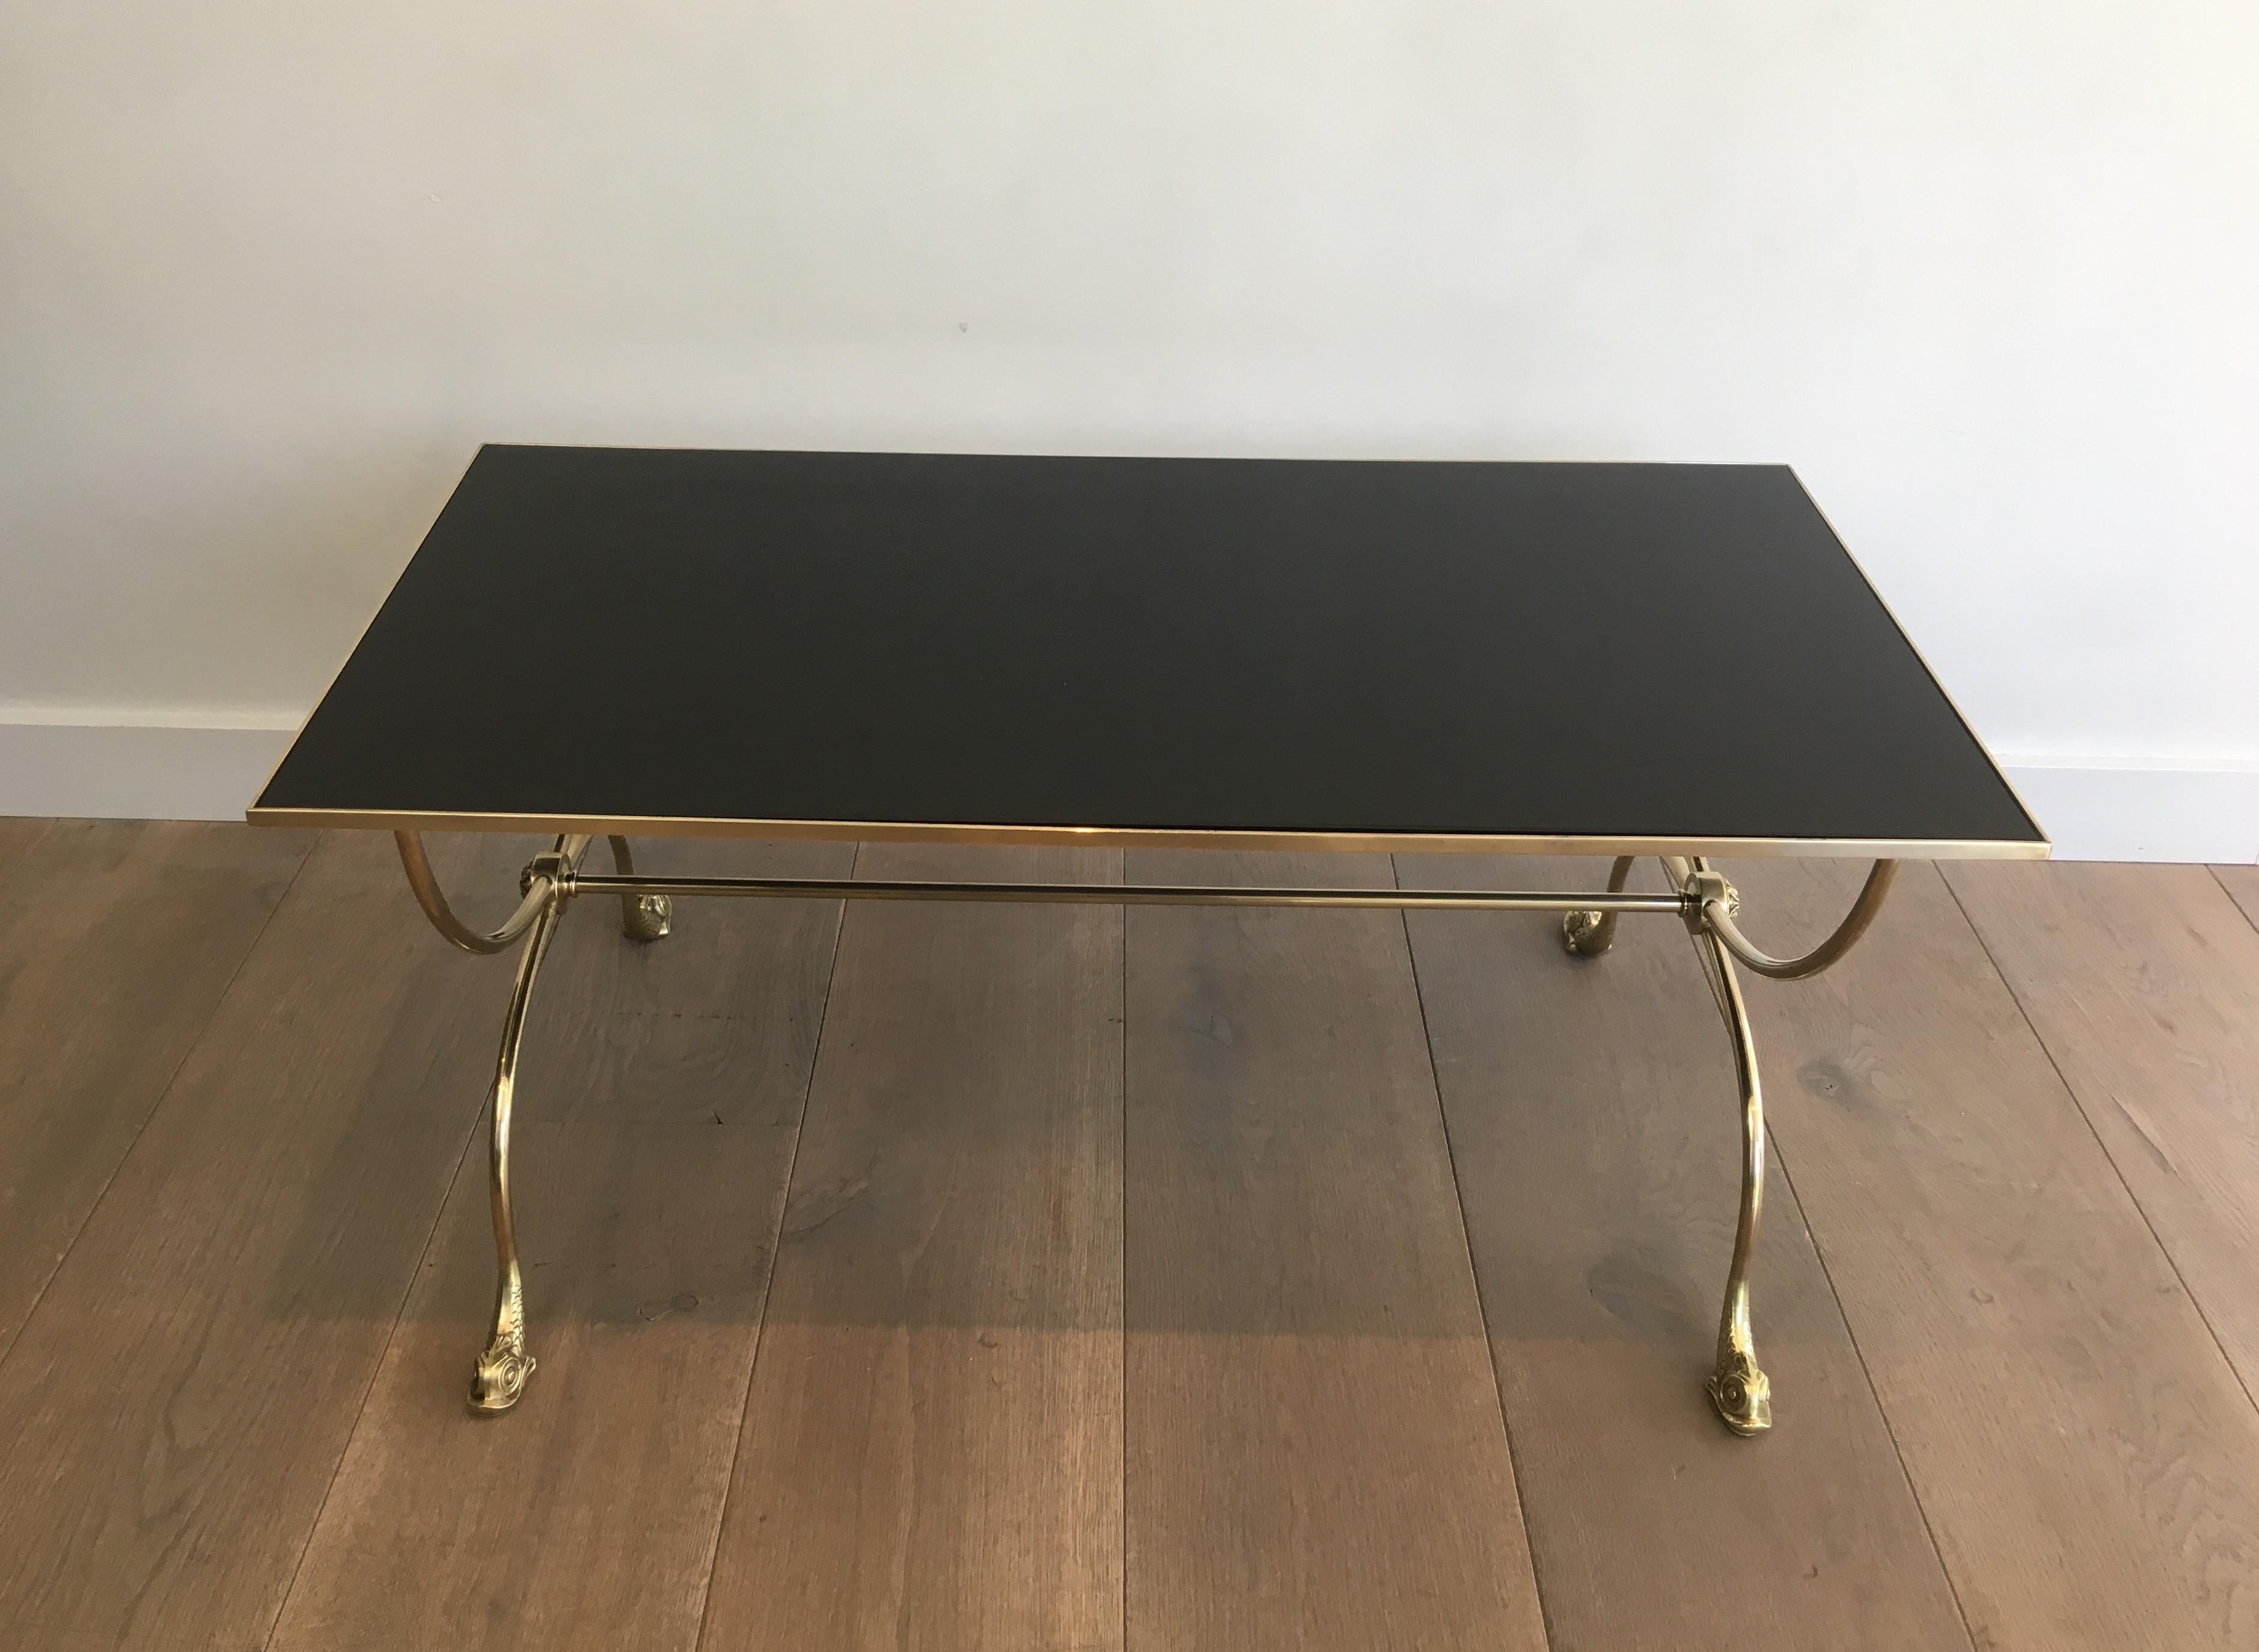 This beautiful neoclassical style coffee table is made of brass with dolphin heads and a black lacquered glass shelf. This is a very elegant and decorative work by famous French designer Maison Jansen, circa 1940.